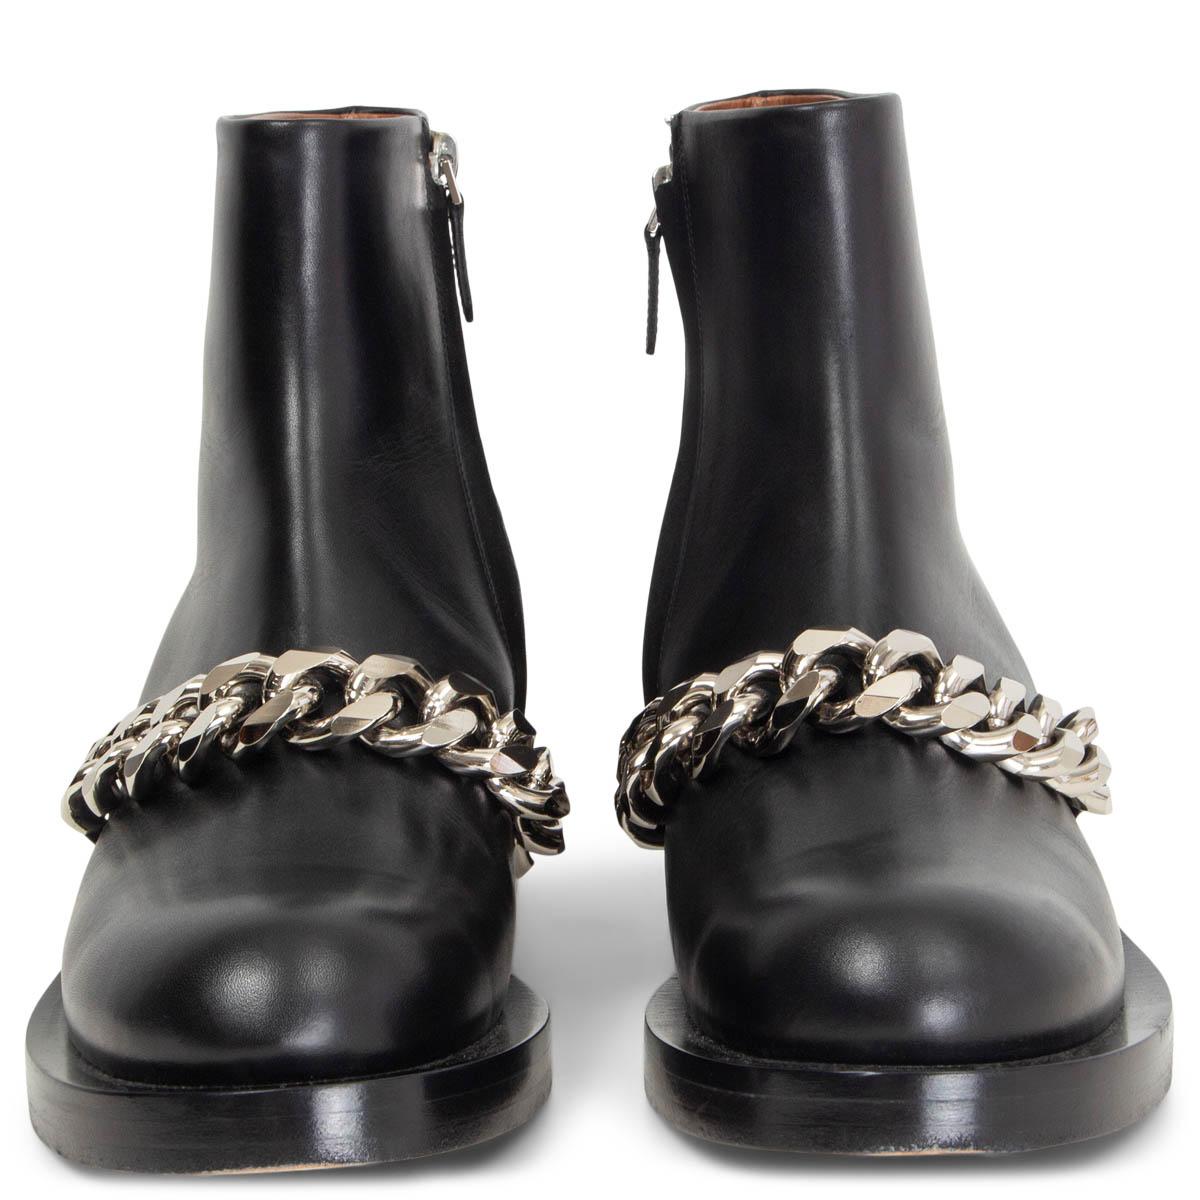 100% authentic Givenchy Laura Chain Strap Ankle Boots in black calfskin featuring a chunky silver-tone chain on the instep. Opens with a zipper on the inside. Have been worn once or twice and are in excellent condition. Come with dust bag.